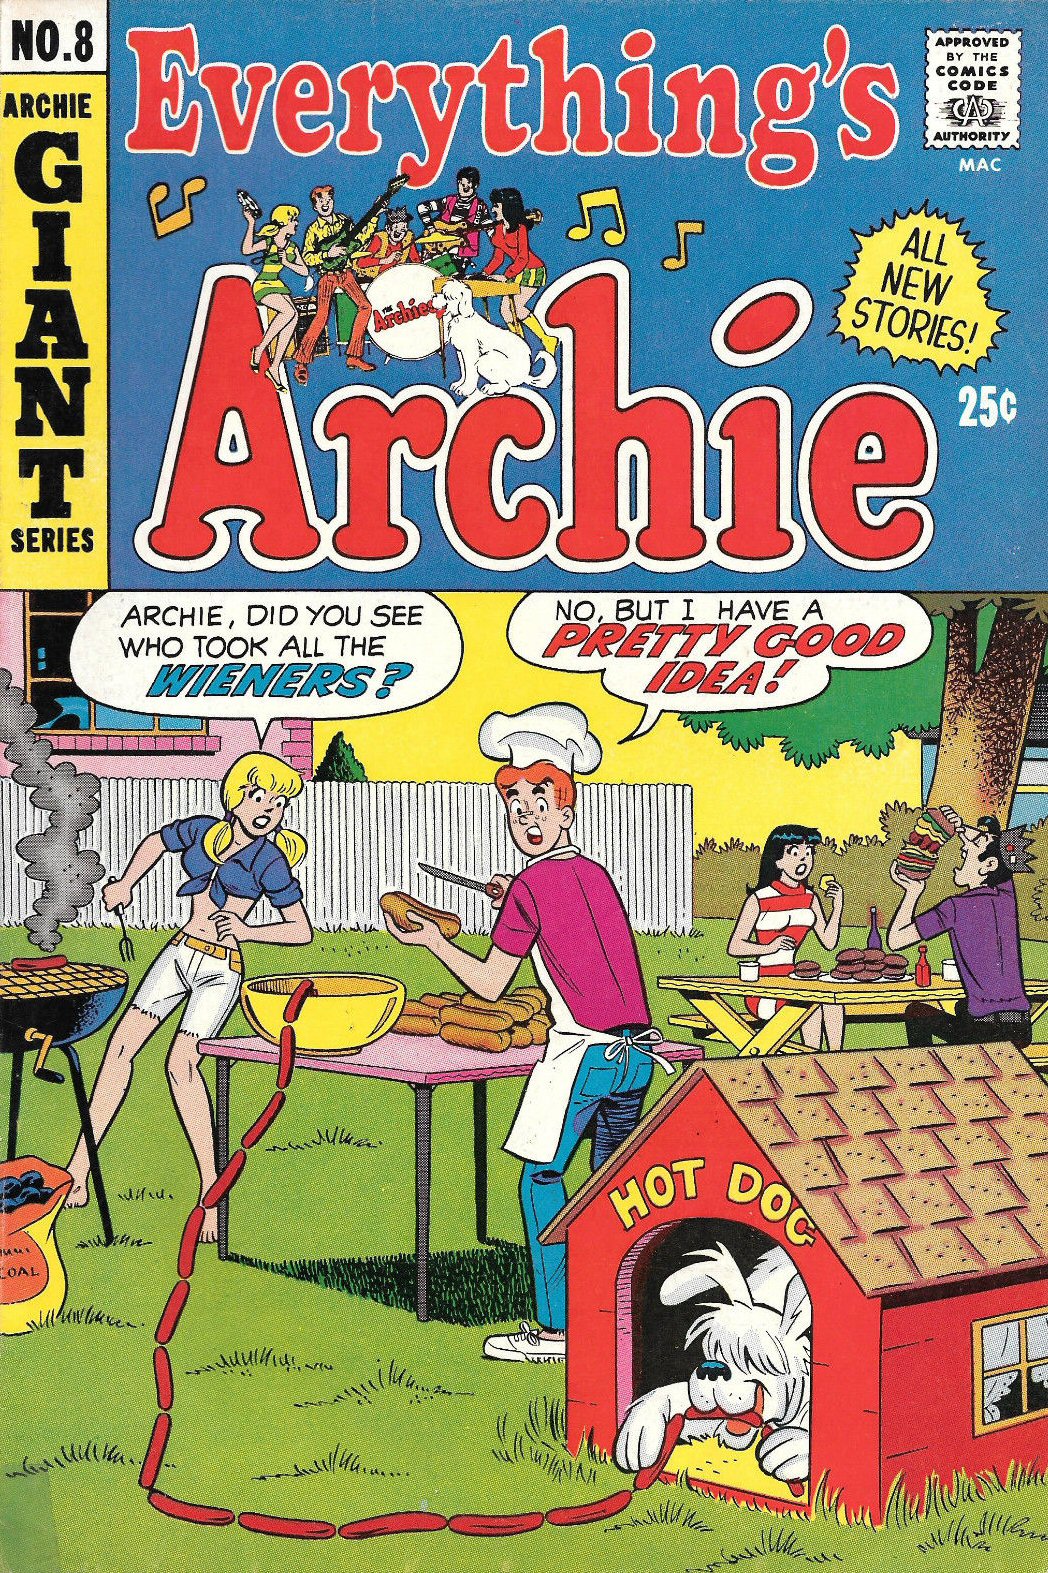 Read online Everything's Archie comic -  Issue #8 - 1